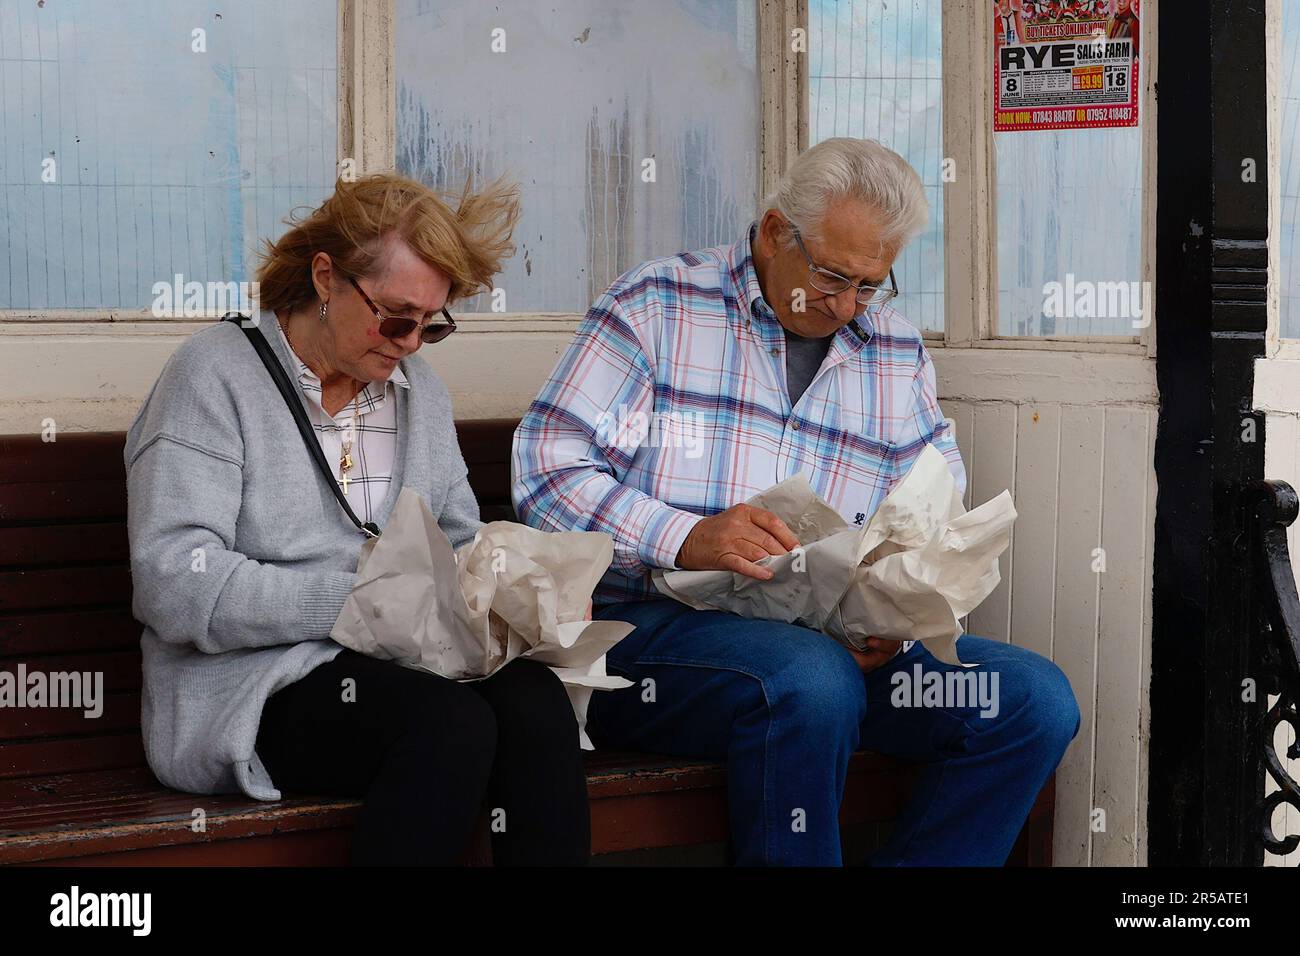 Hastings, East Sussex, UK. 02 June, 2023. Queues form outside Hastings fish and chip shops on Fryday. Celebrating fish and chips and the industry involved. Couple eating fish and chips in wrapped paper on a bench. Photo Credit: Paul Lawrenson /Alamy Live News Stock Photo